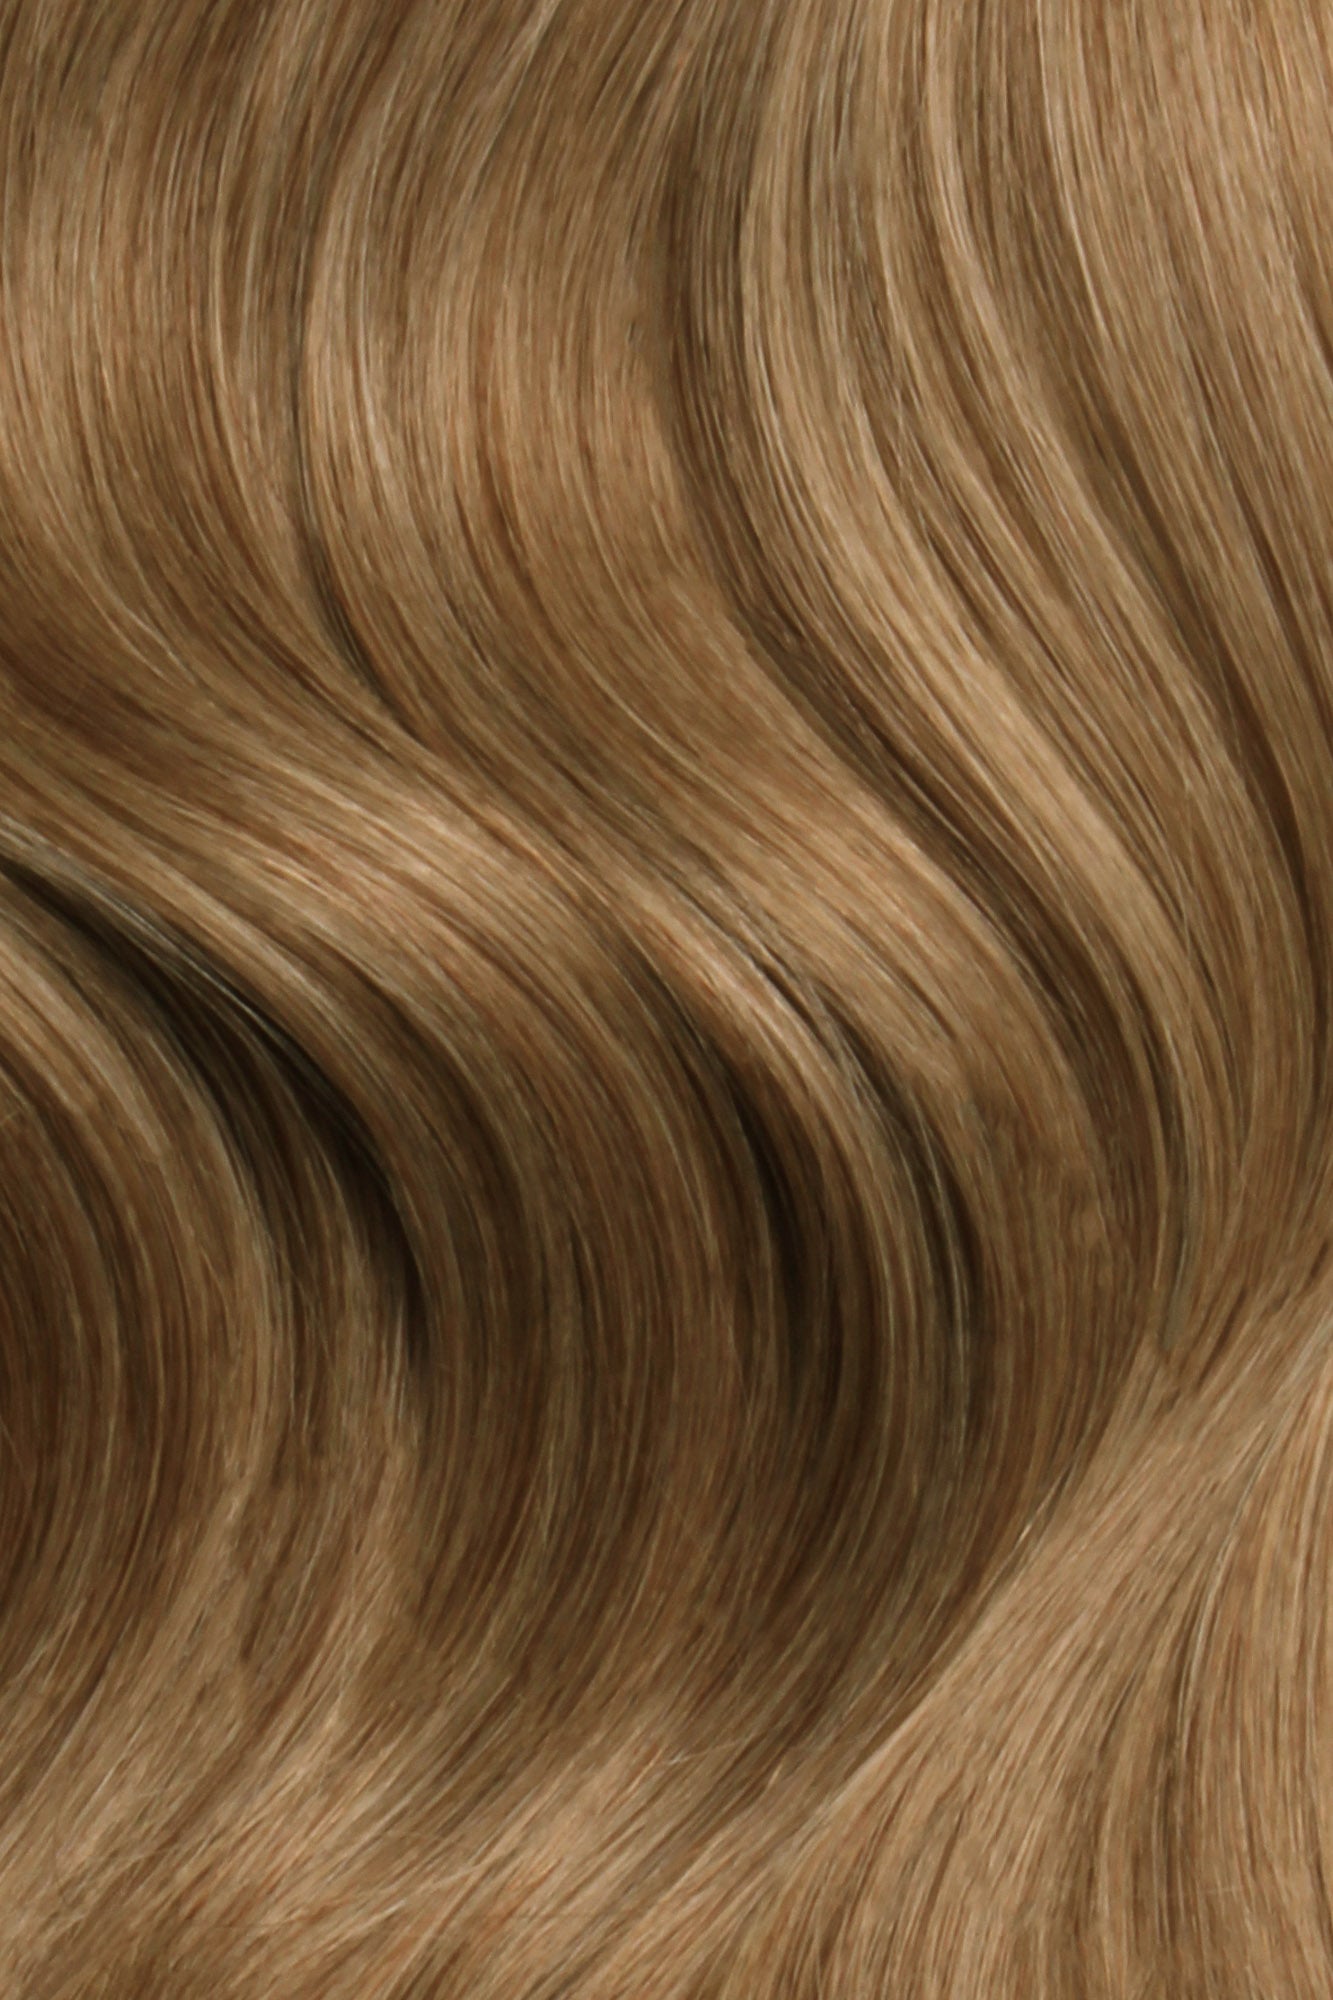 Tiny Tip Bonds 22&quot; - SWAY Hair Extensions Chestnut-Blonde-Mix: Lightweight, discreet. Made with Italian Keratin for comfort and long-lasting wear. Reusable and compatible with other SWAY Salon Professional Methods